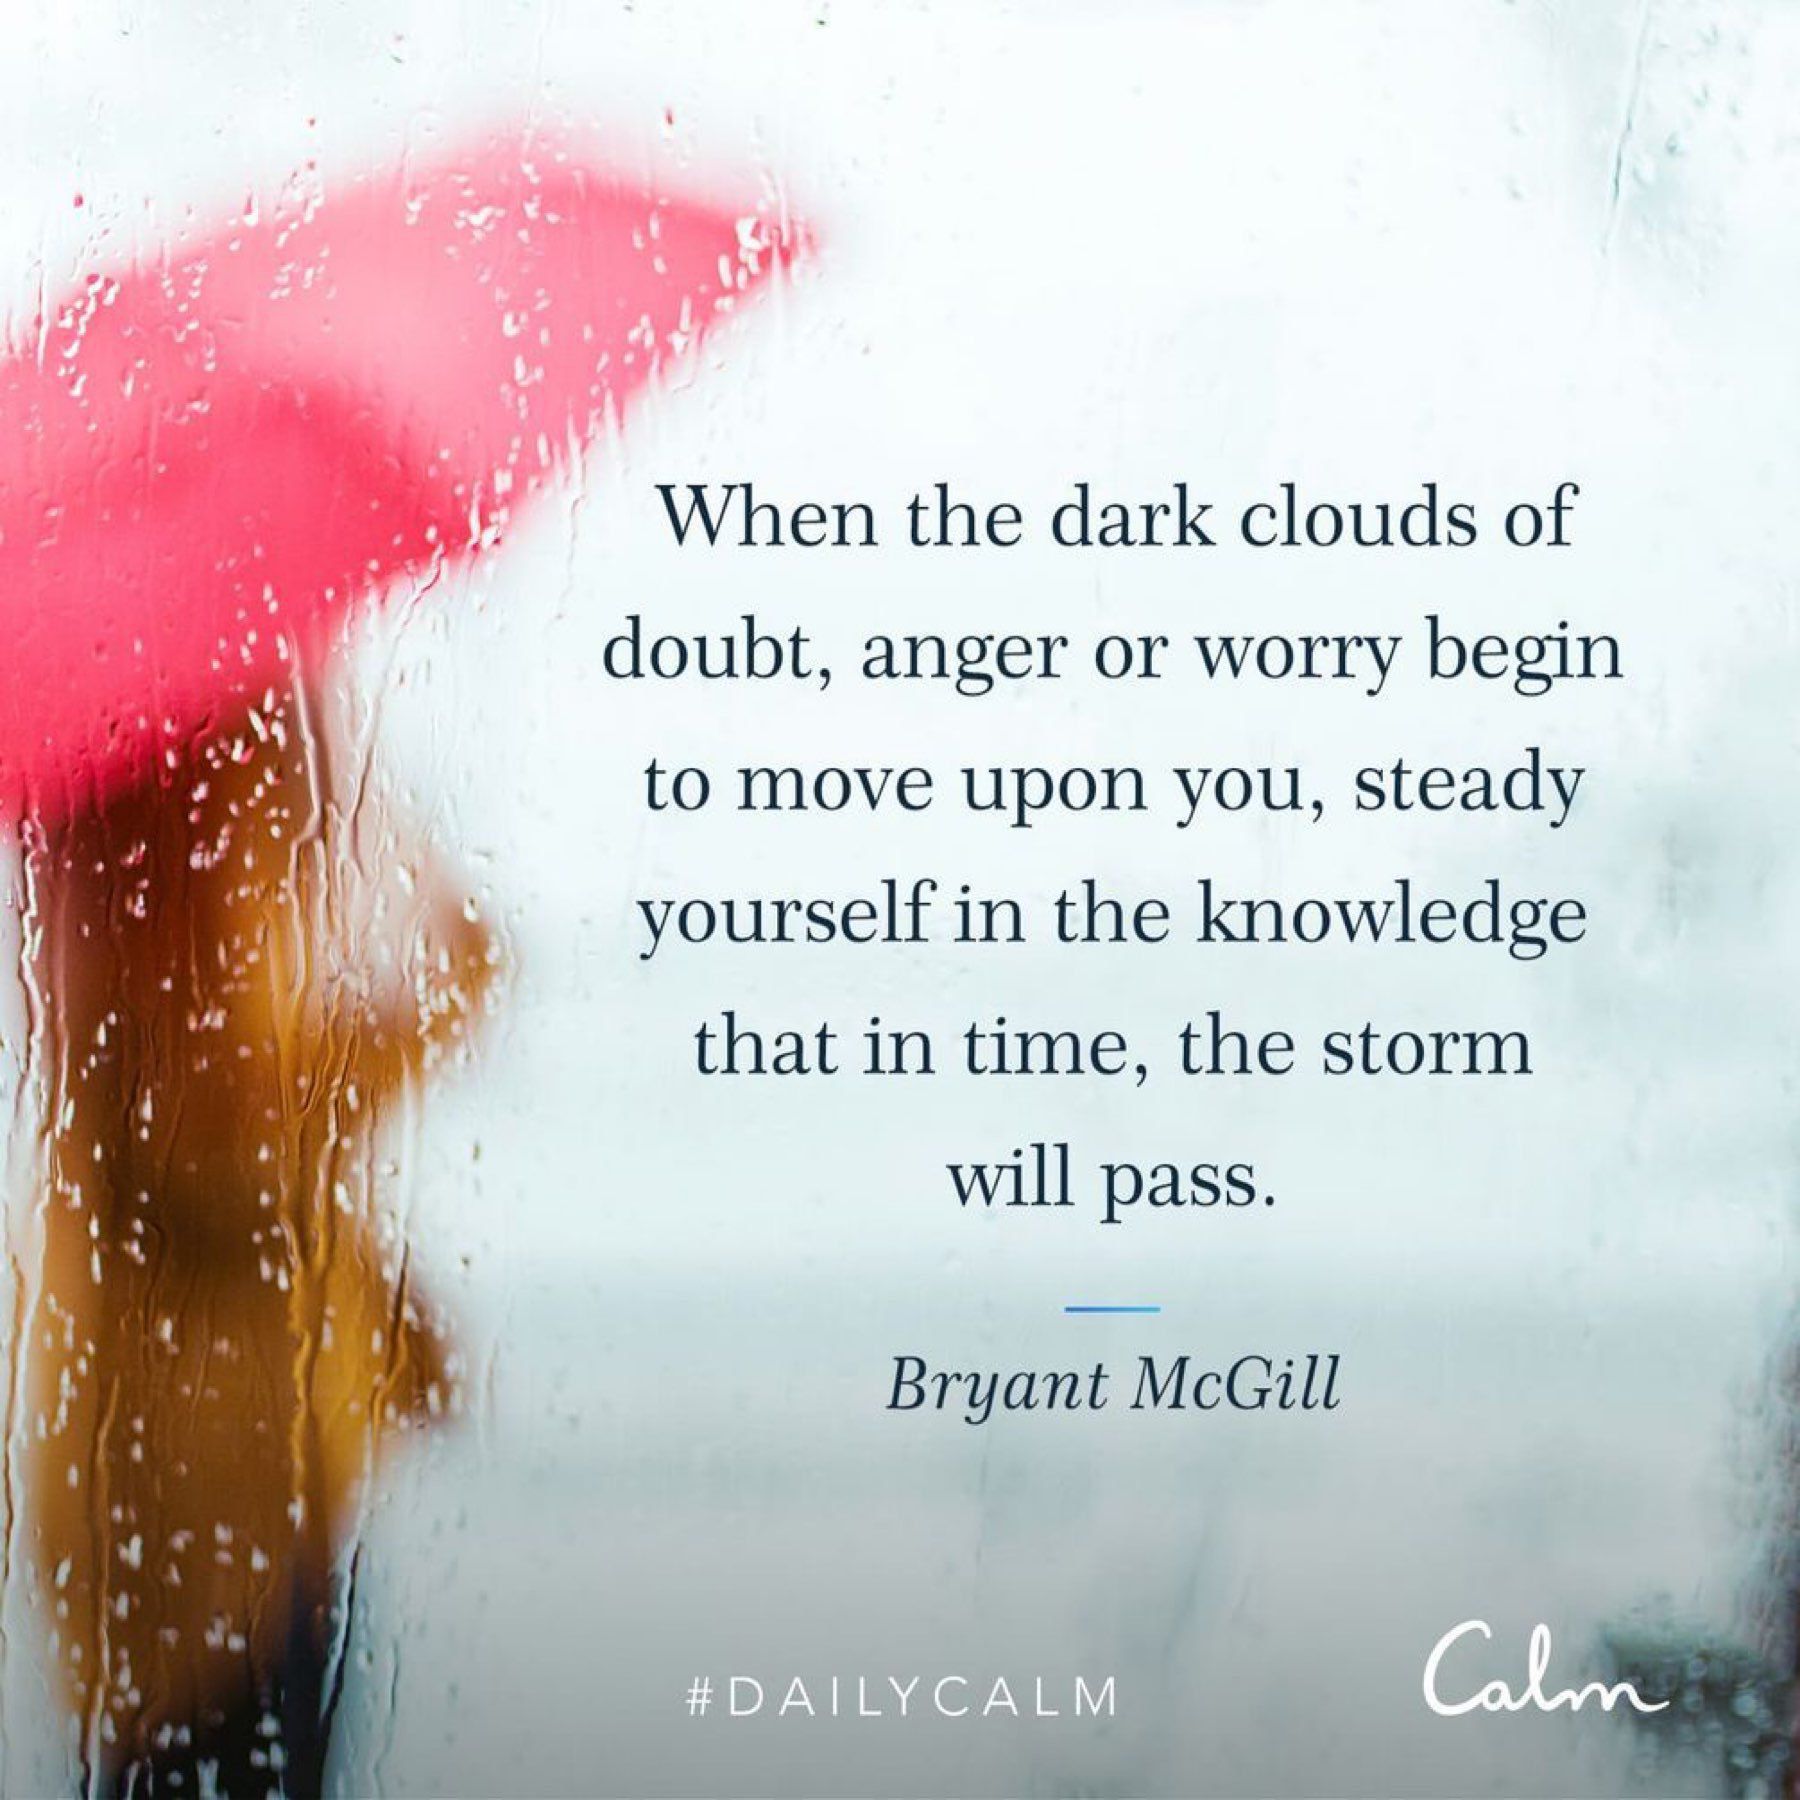 When the clouds of doubt come, we can find peace knowing that the storm will pass